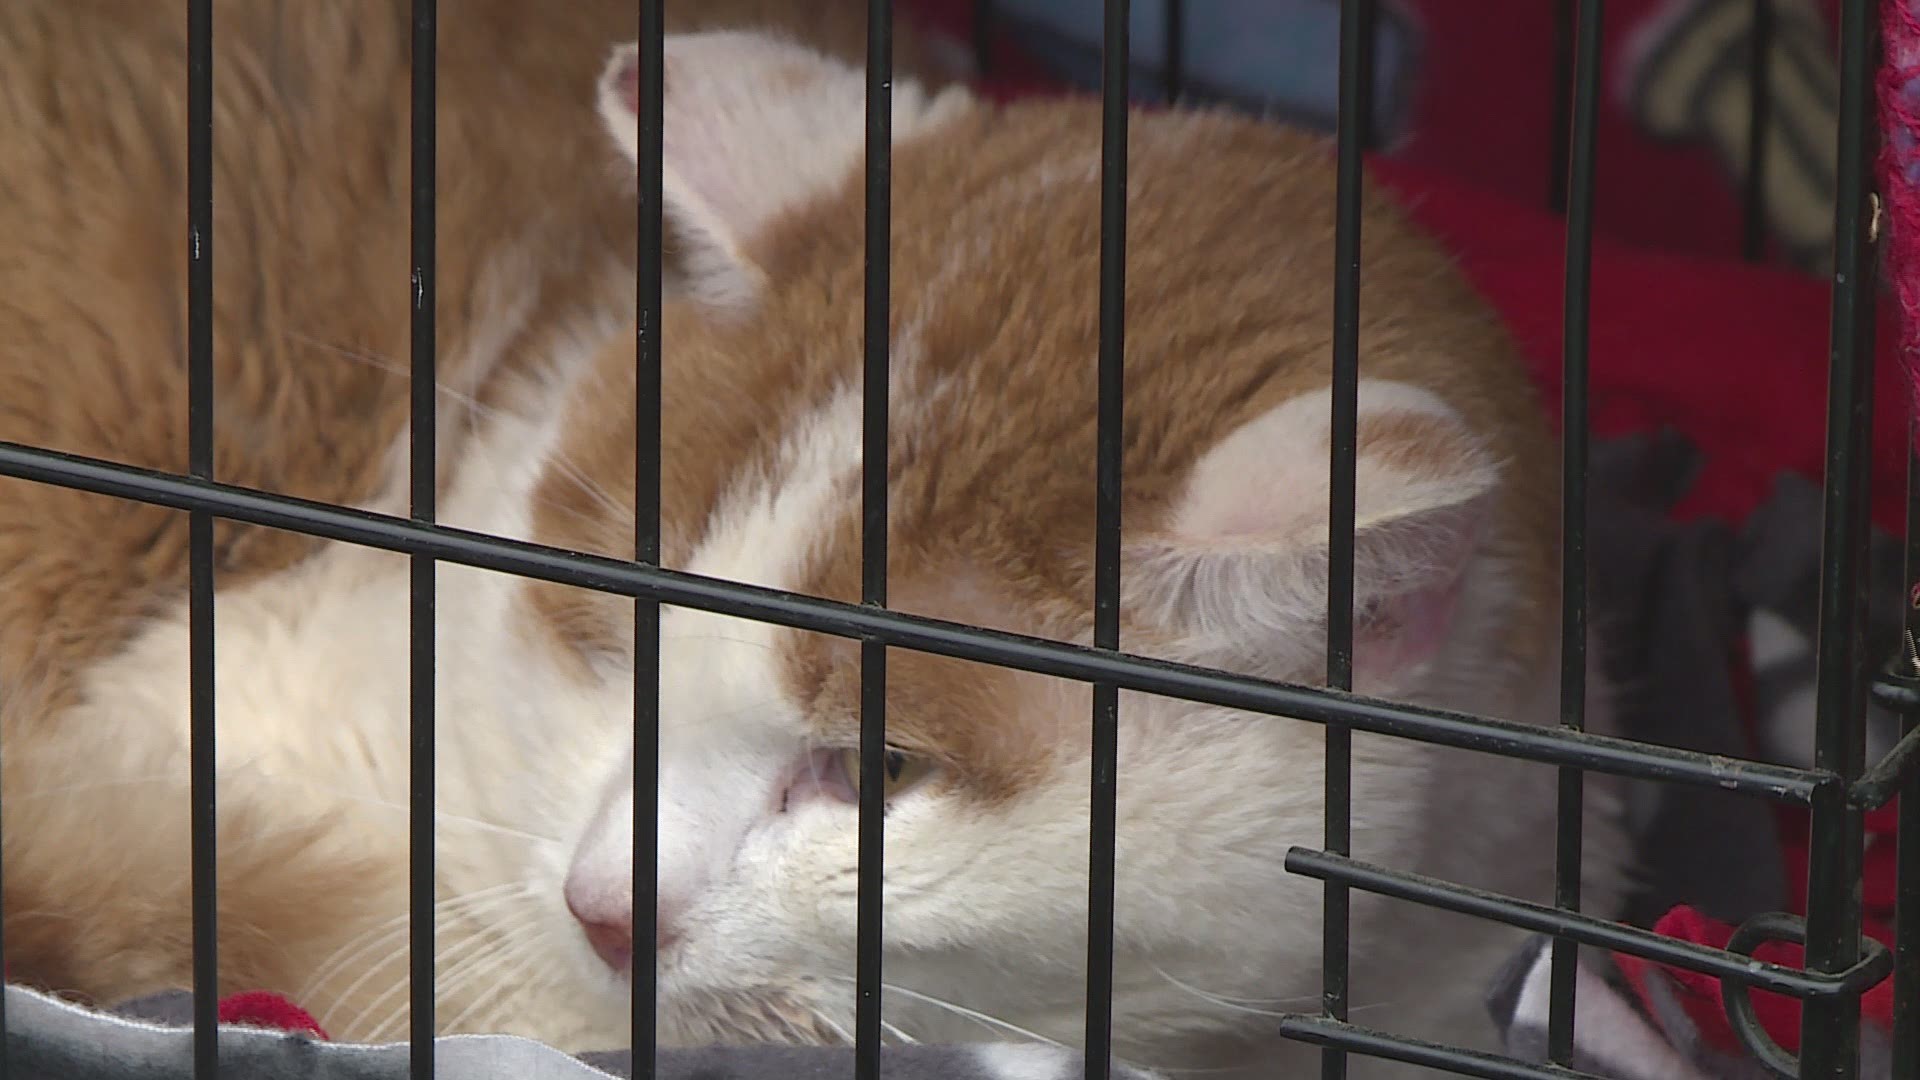 Authorities were able to save a cat from a Fort Smith park from freezing to death on Wednesday.